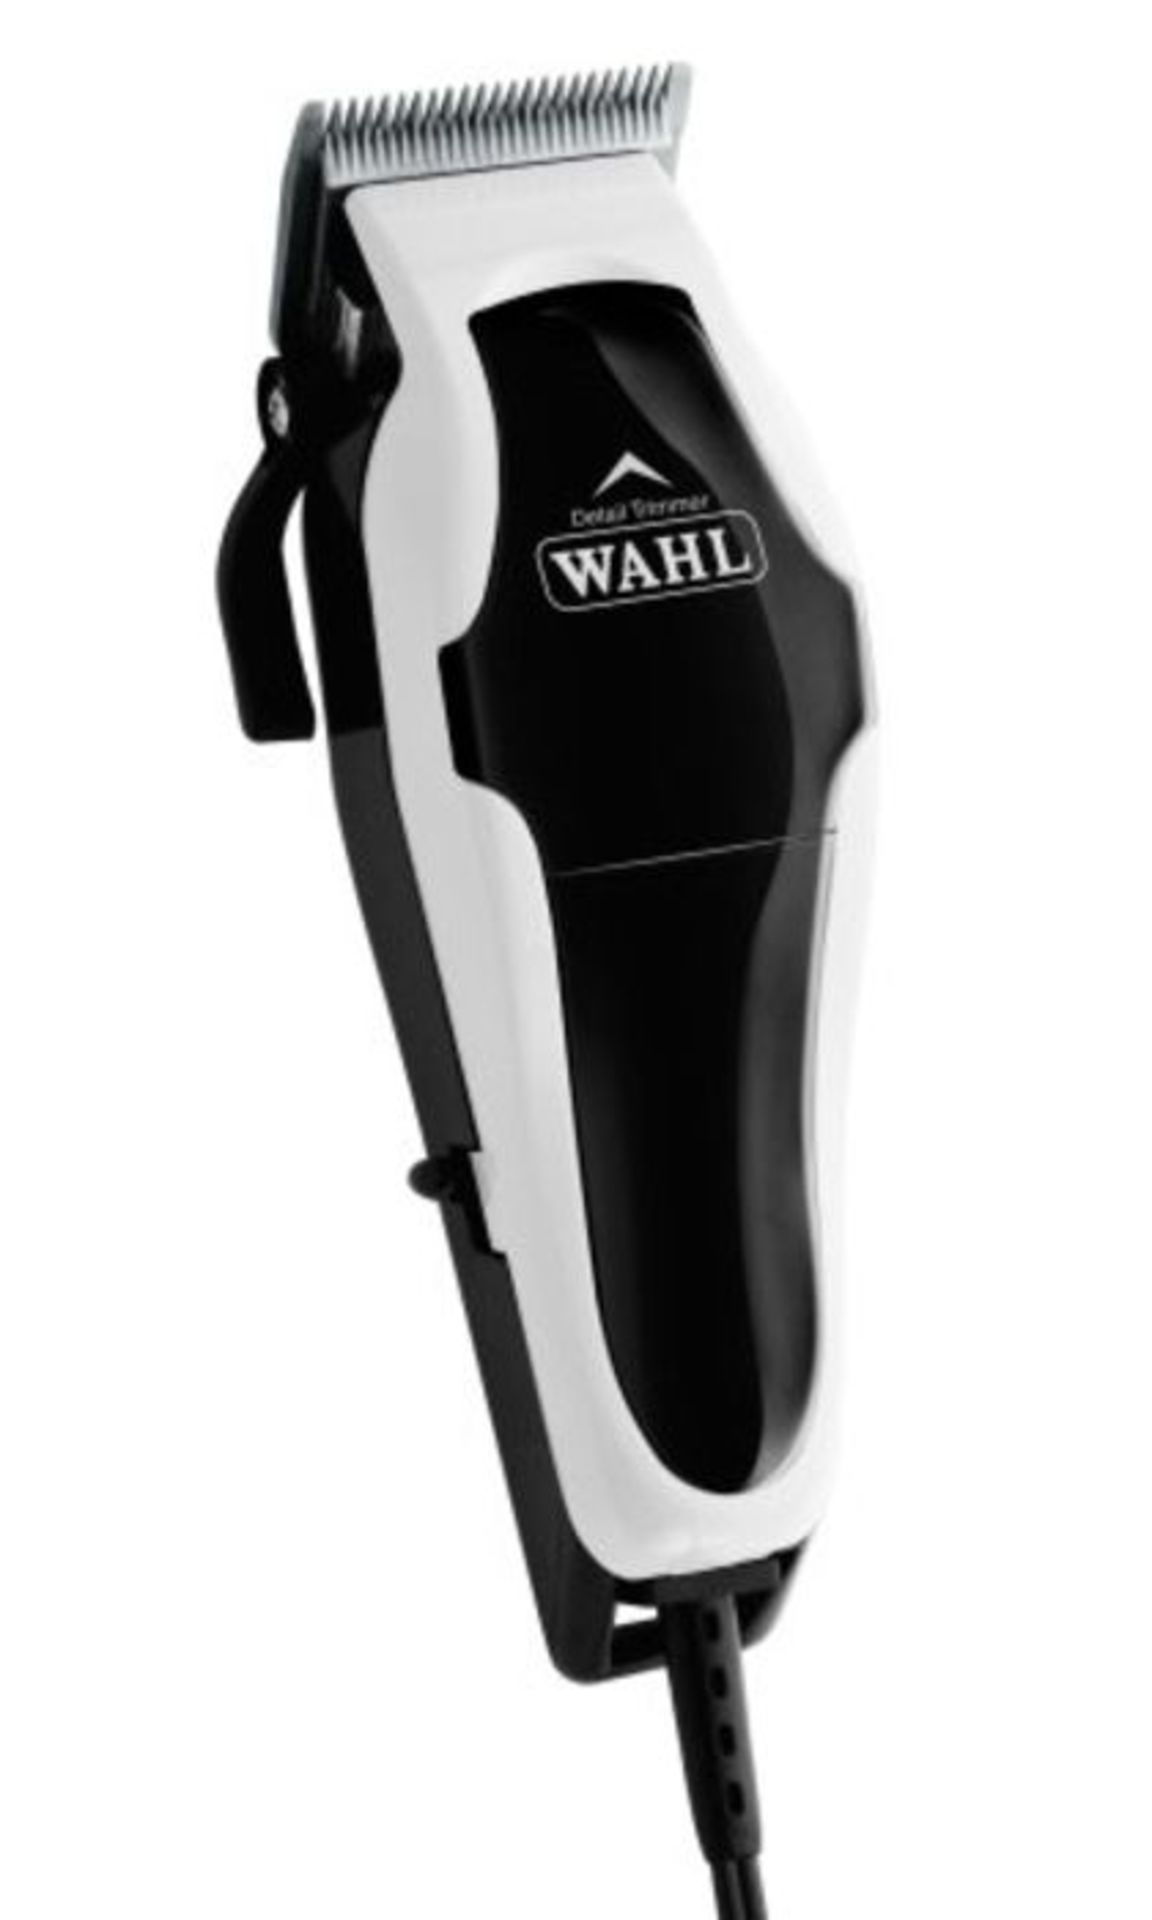 Wahl Hair Clippers for Men, Clip N Trim 2 Head Shaver Men's hair clippers with integra